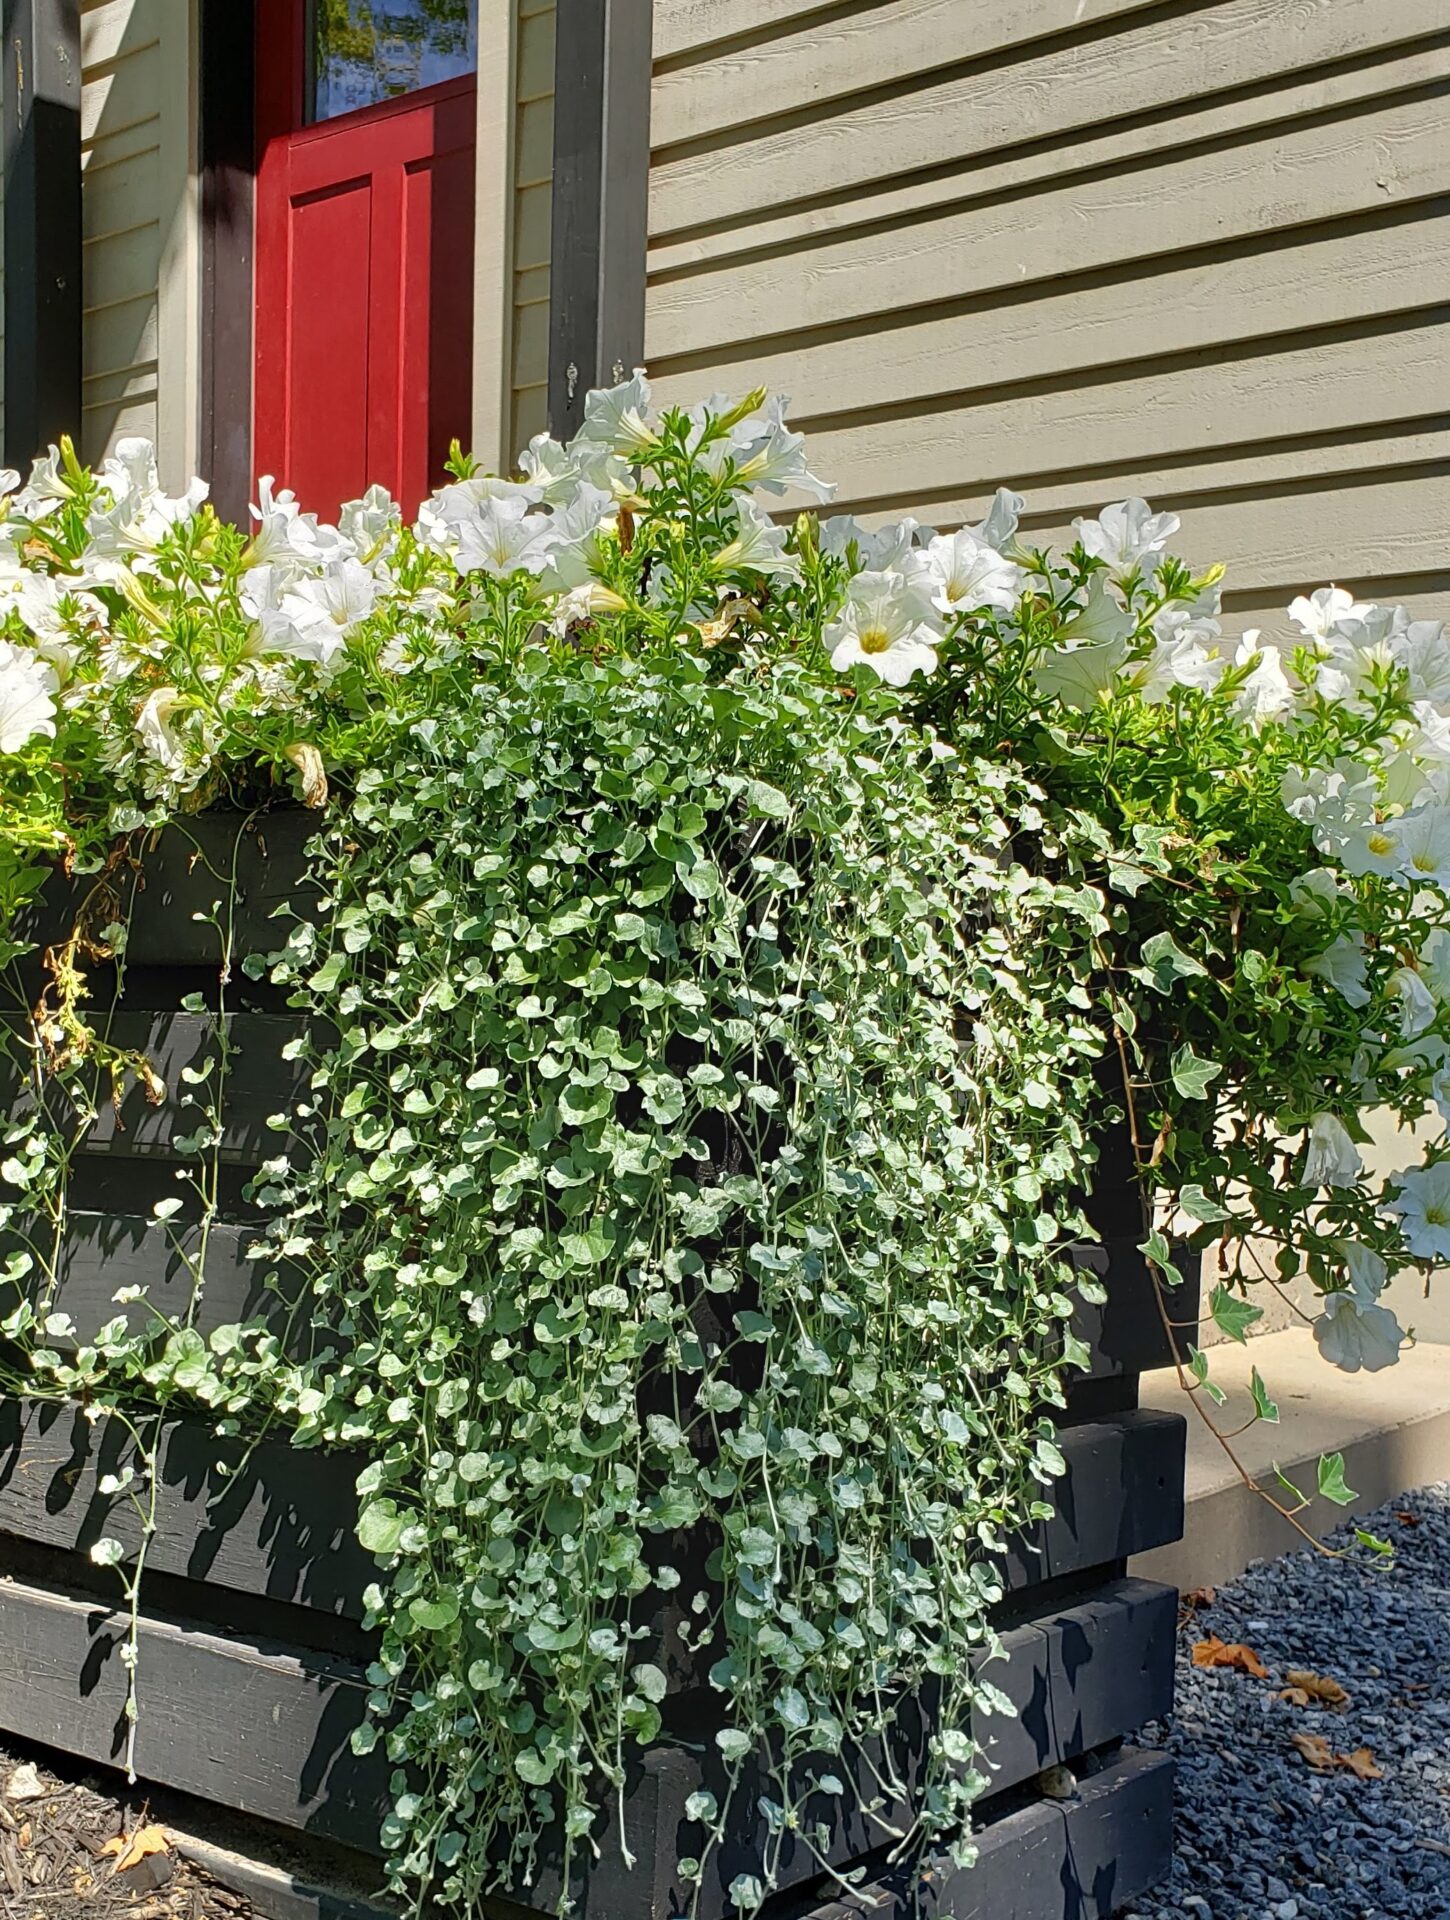 This image shows a lush planter with cascading greenery and white flowers against a house with beige siding and a red door.